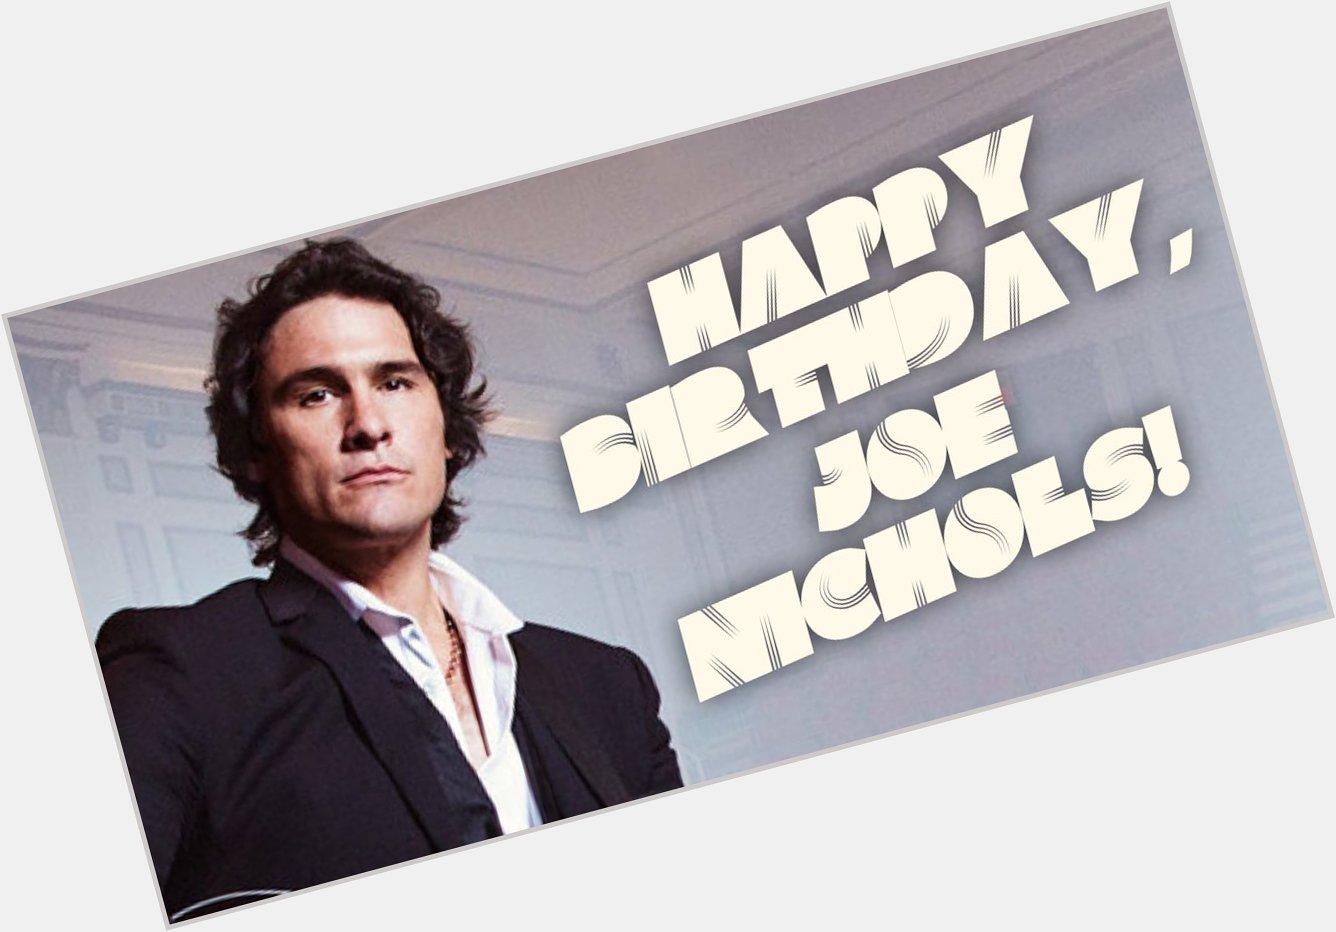 Happy Birthday to Joe Nichols! What s your favorite of his country hits?  